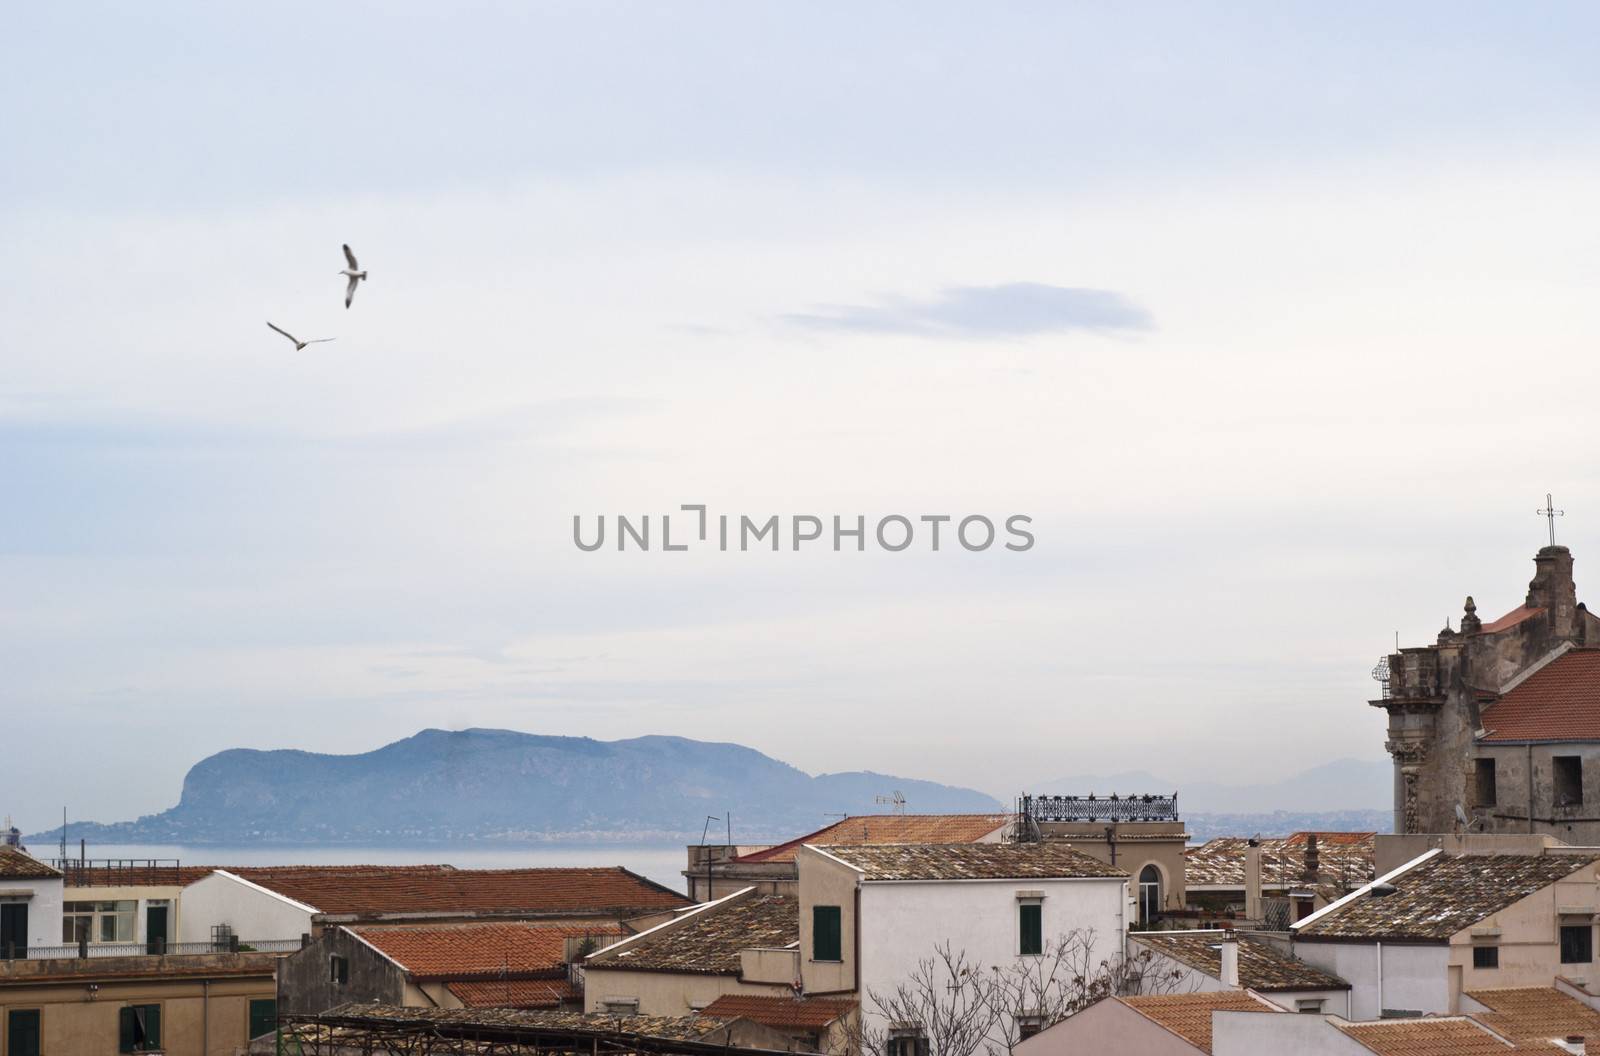 View of Palermo with roofs and seagulls. Sicily- Italy